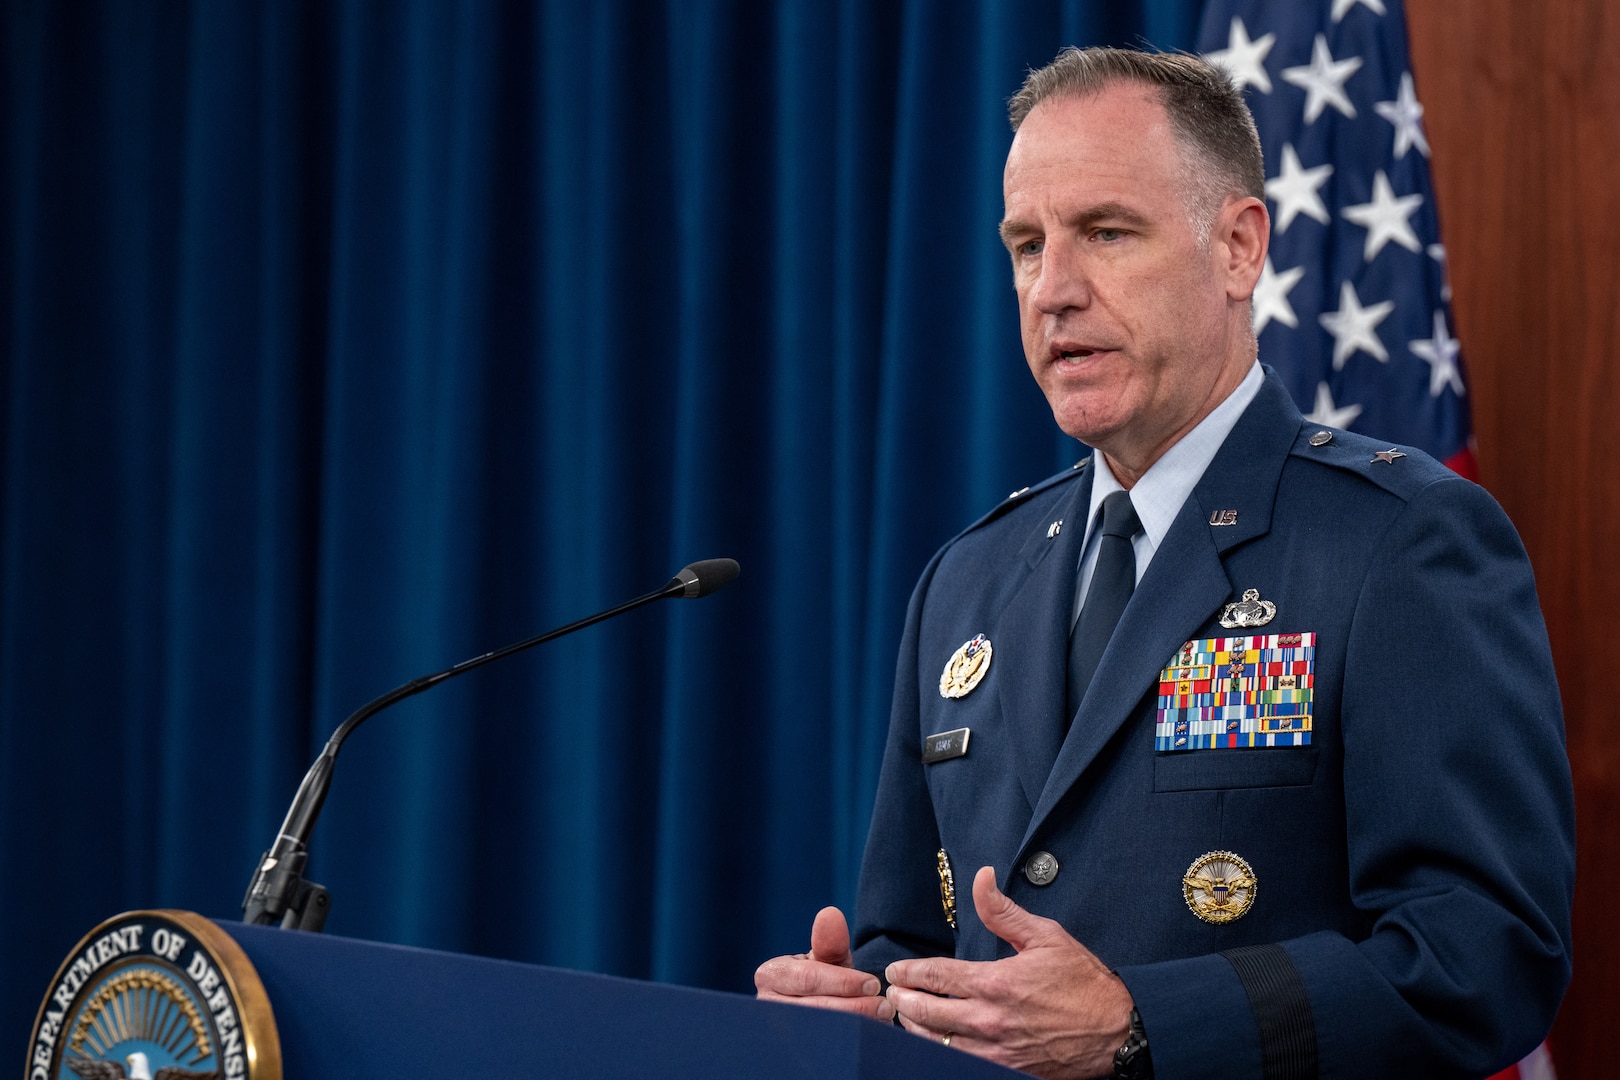 A man in a military uniform speaks during a news conference.